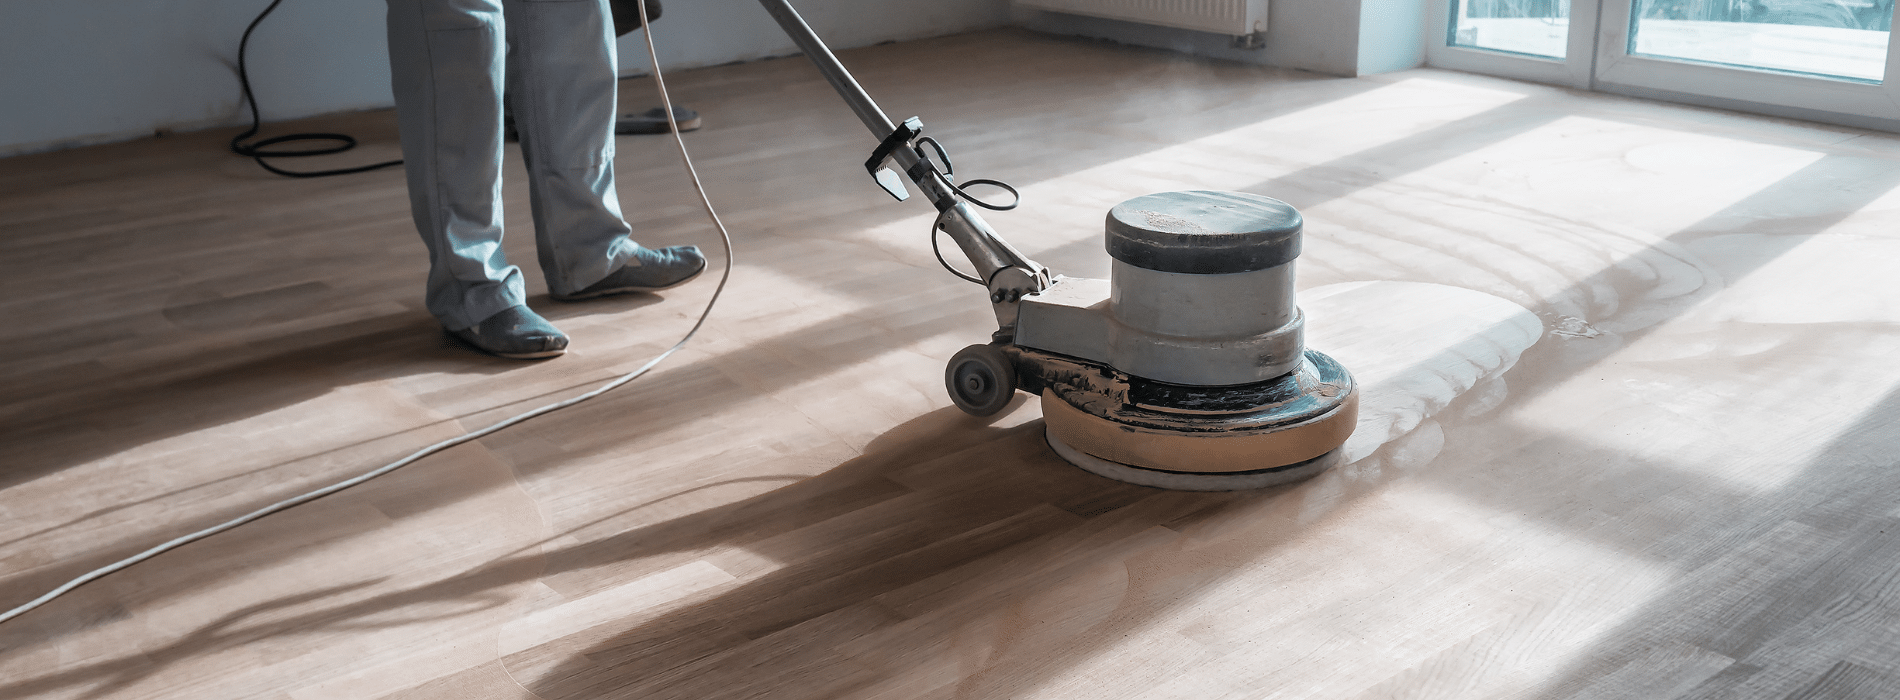 Professional herringbone floor sanding with a powerful Effect 2200 belt sander. Voltage: 220V. Frequency: 60Hz. Size: 250x750 mm. Dust-free process with HEPA-filtered extraction for exceptional results by Mr Sander®.